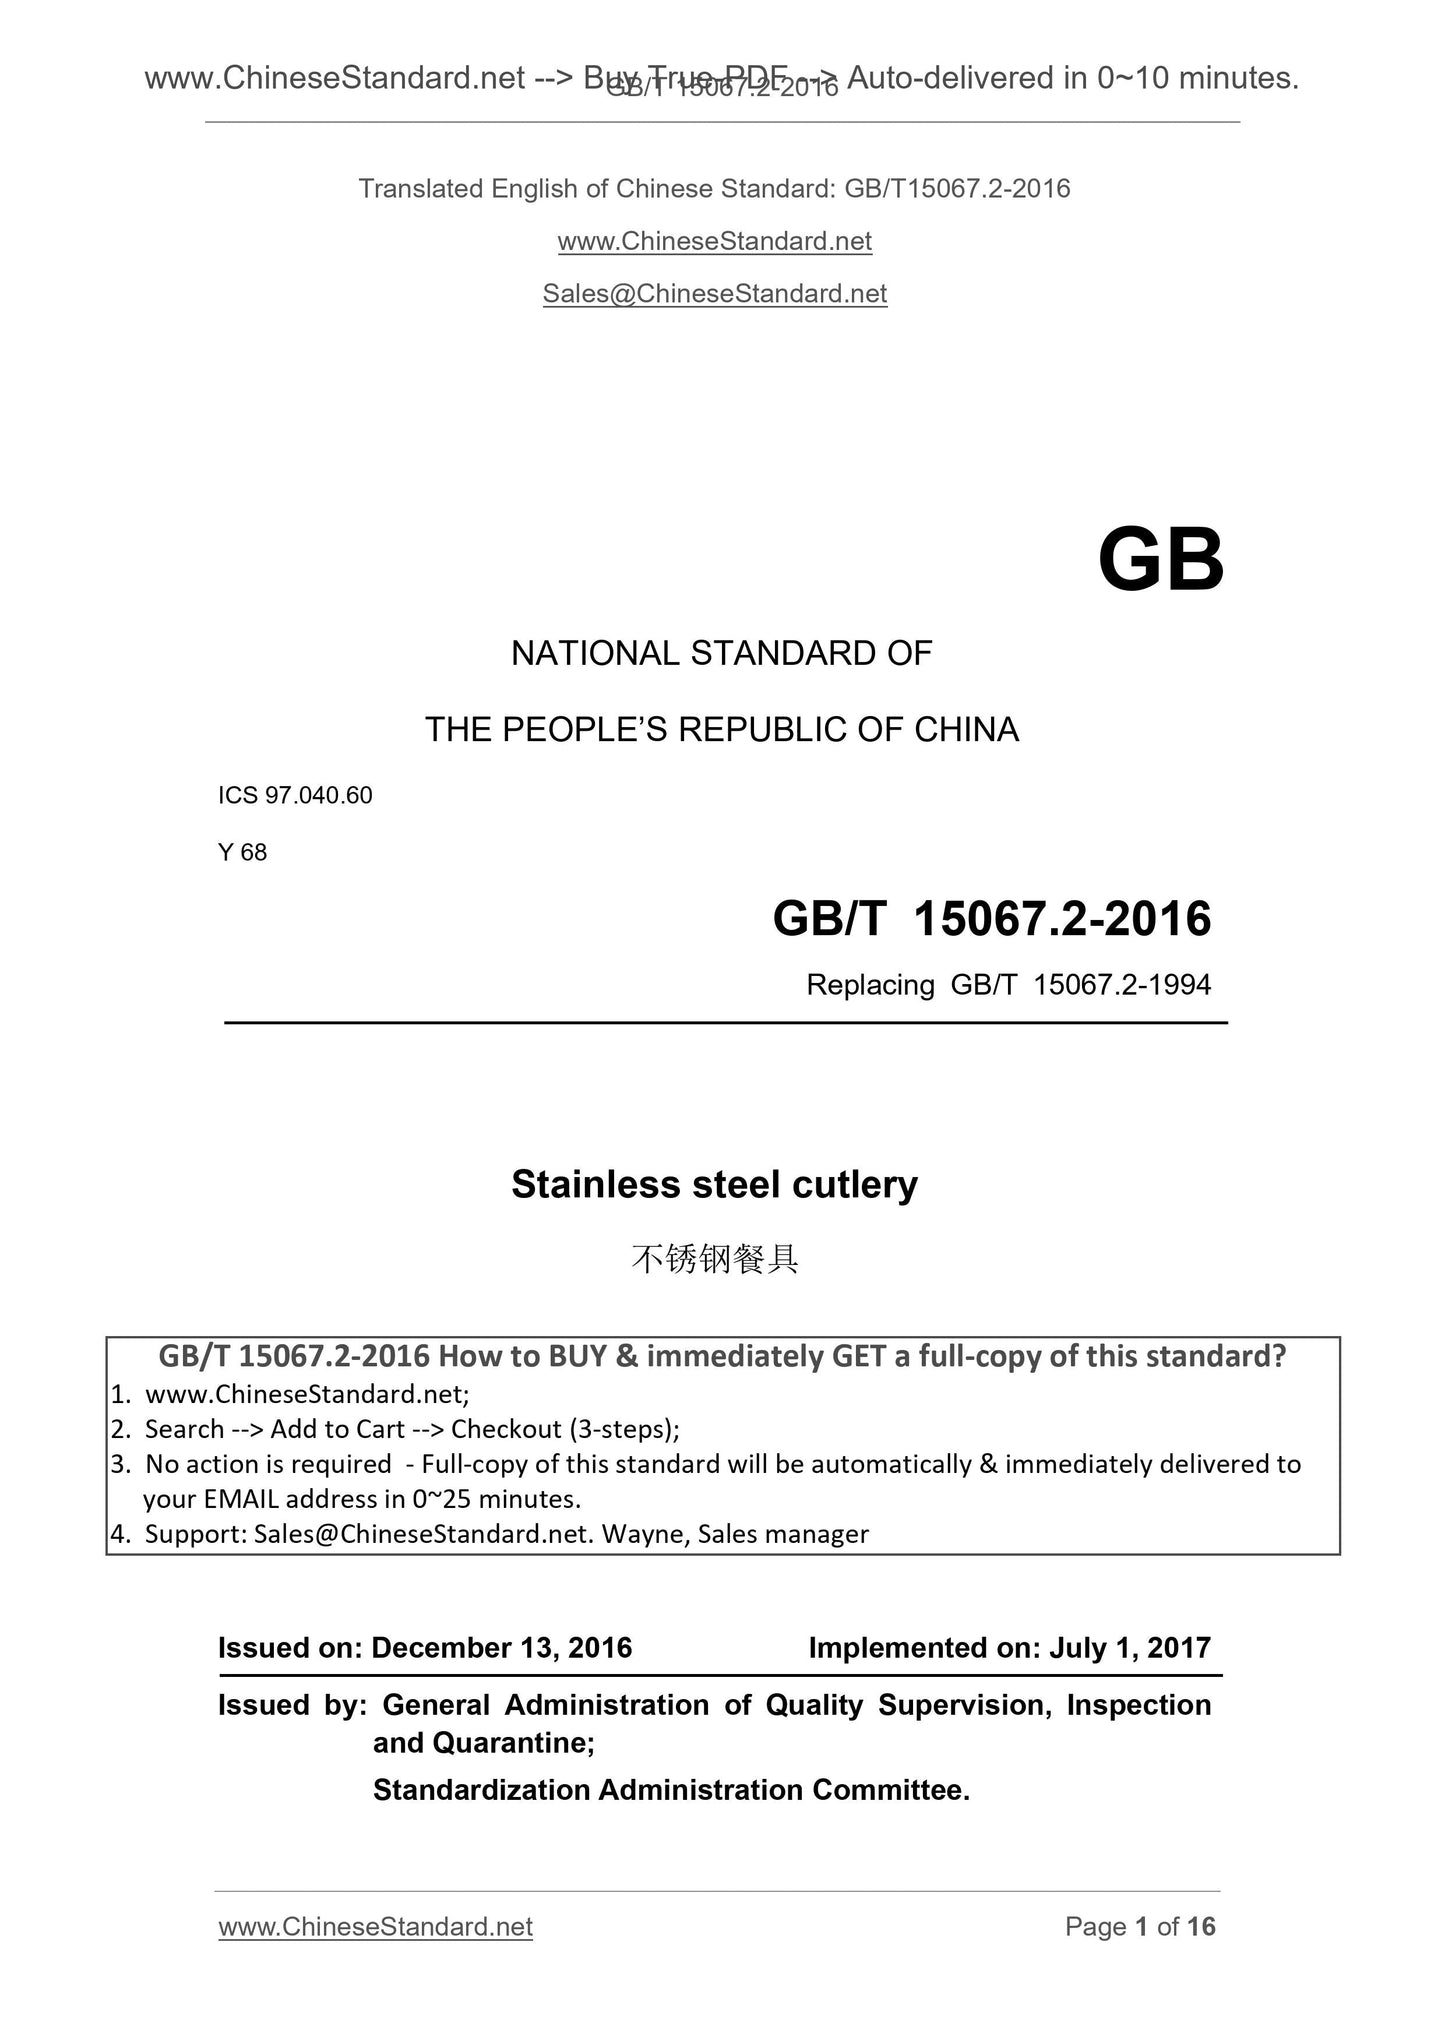 GB/T 15067.2-2016 Page 1